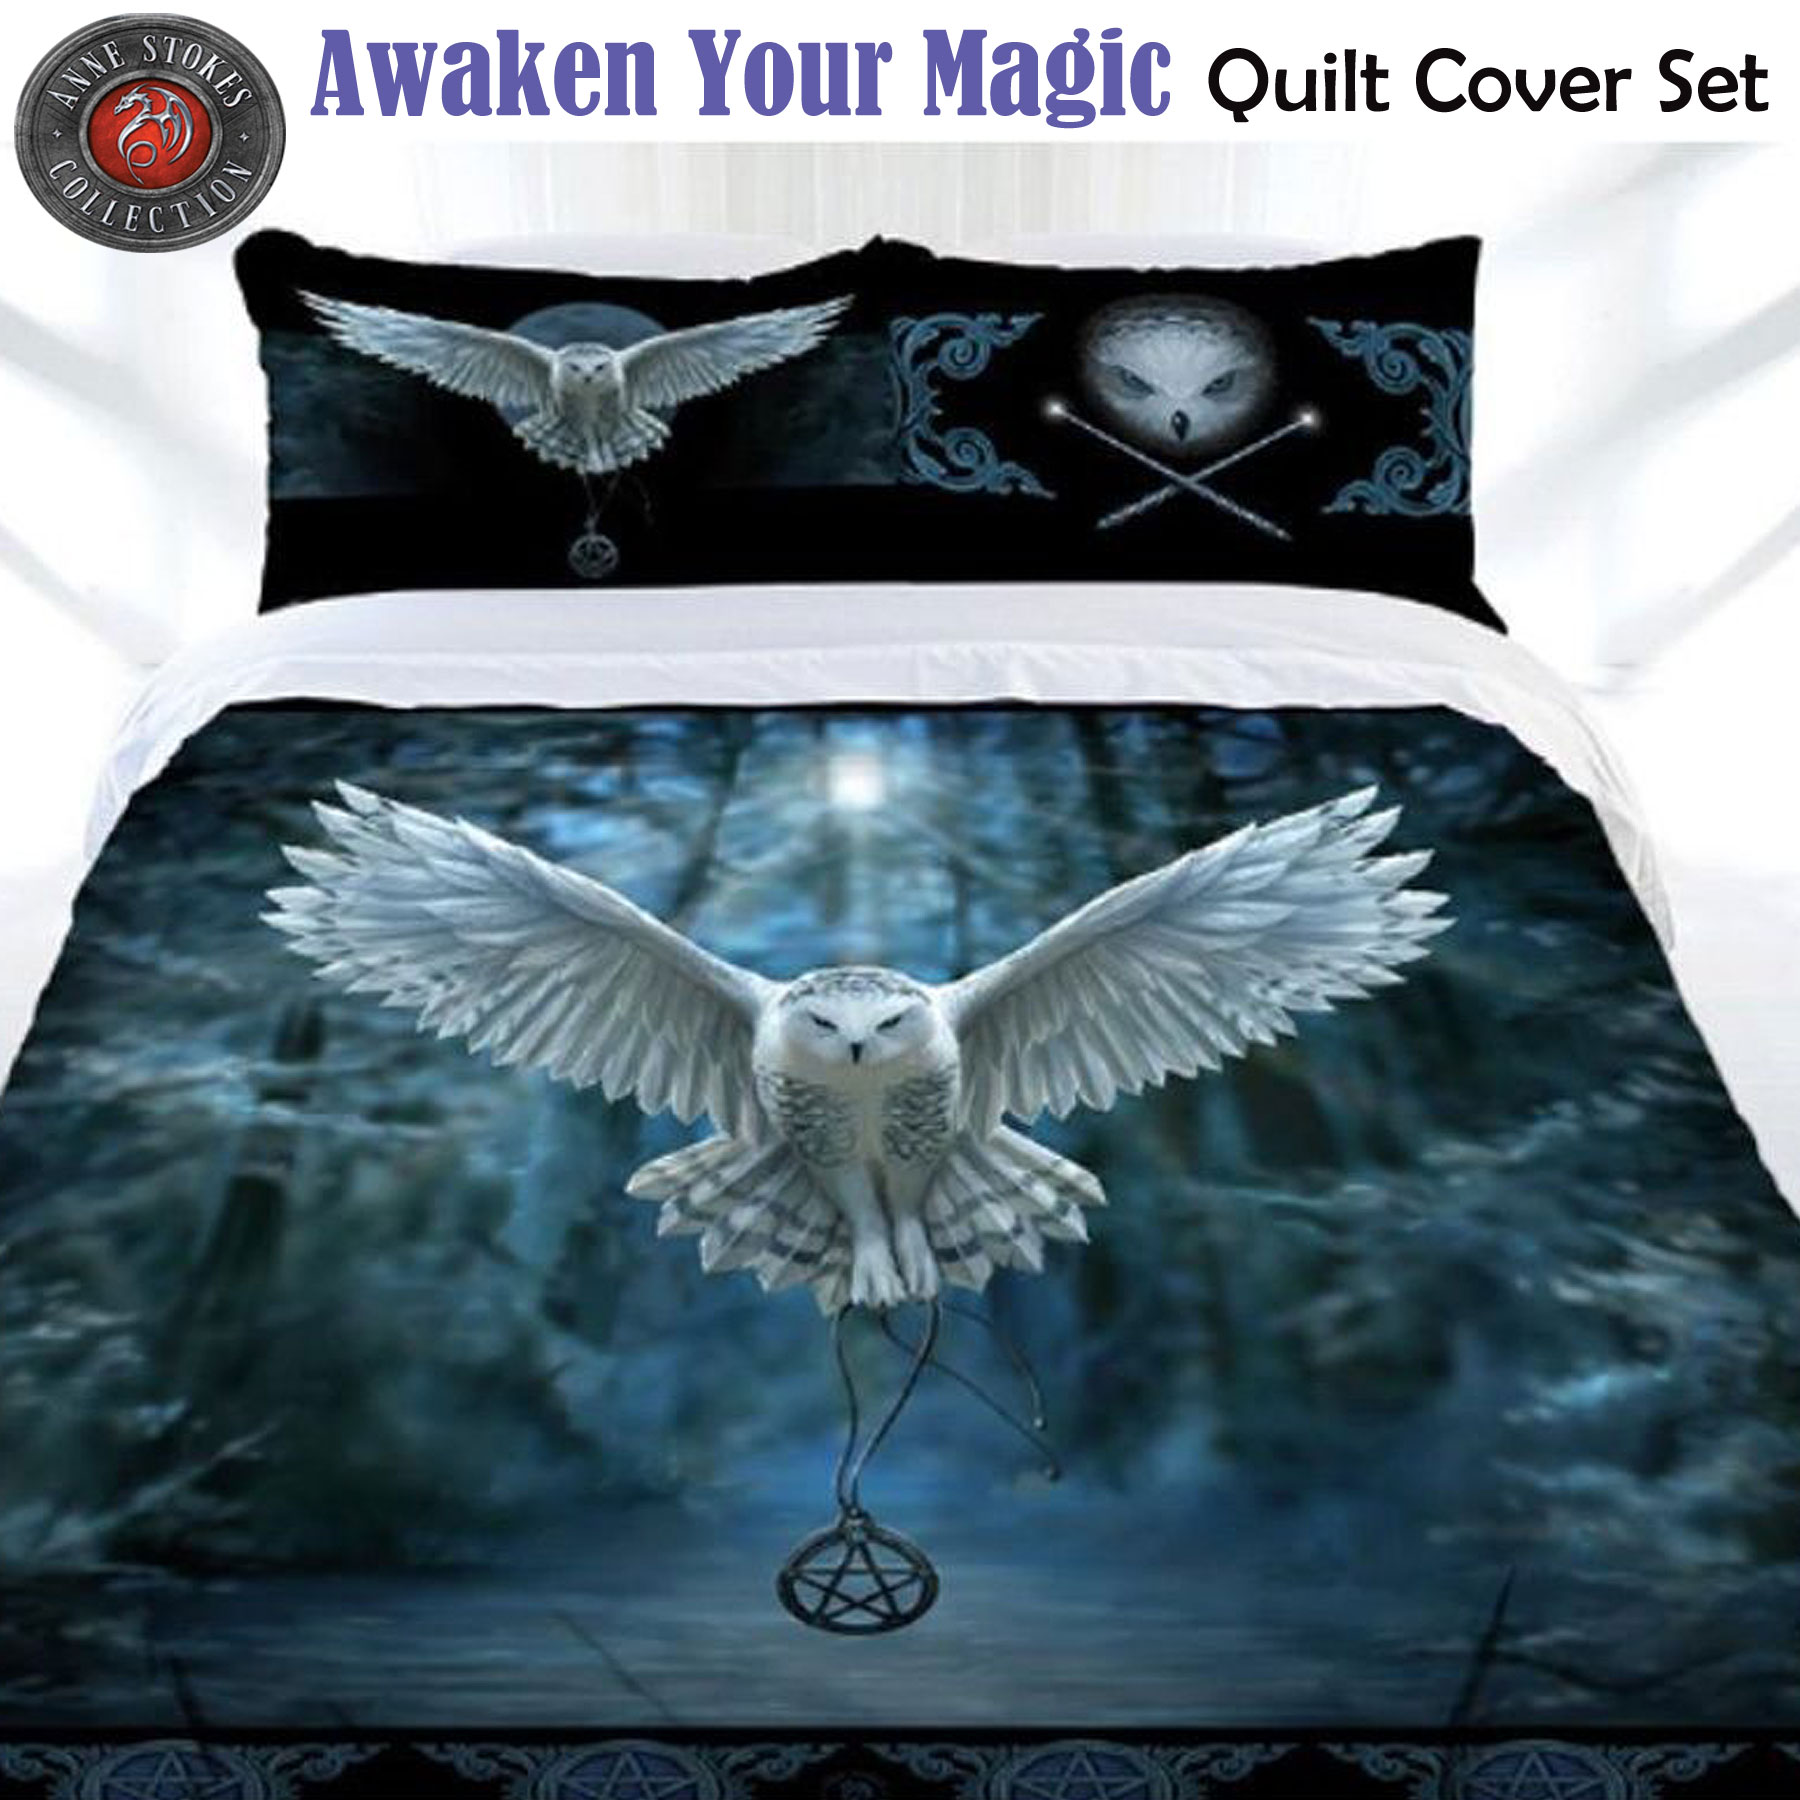 Awaken Your Magic Flying Owl Quilt Cover Set By Anne Stokes